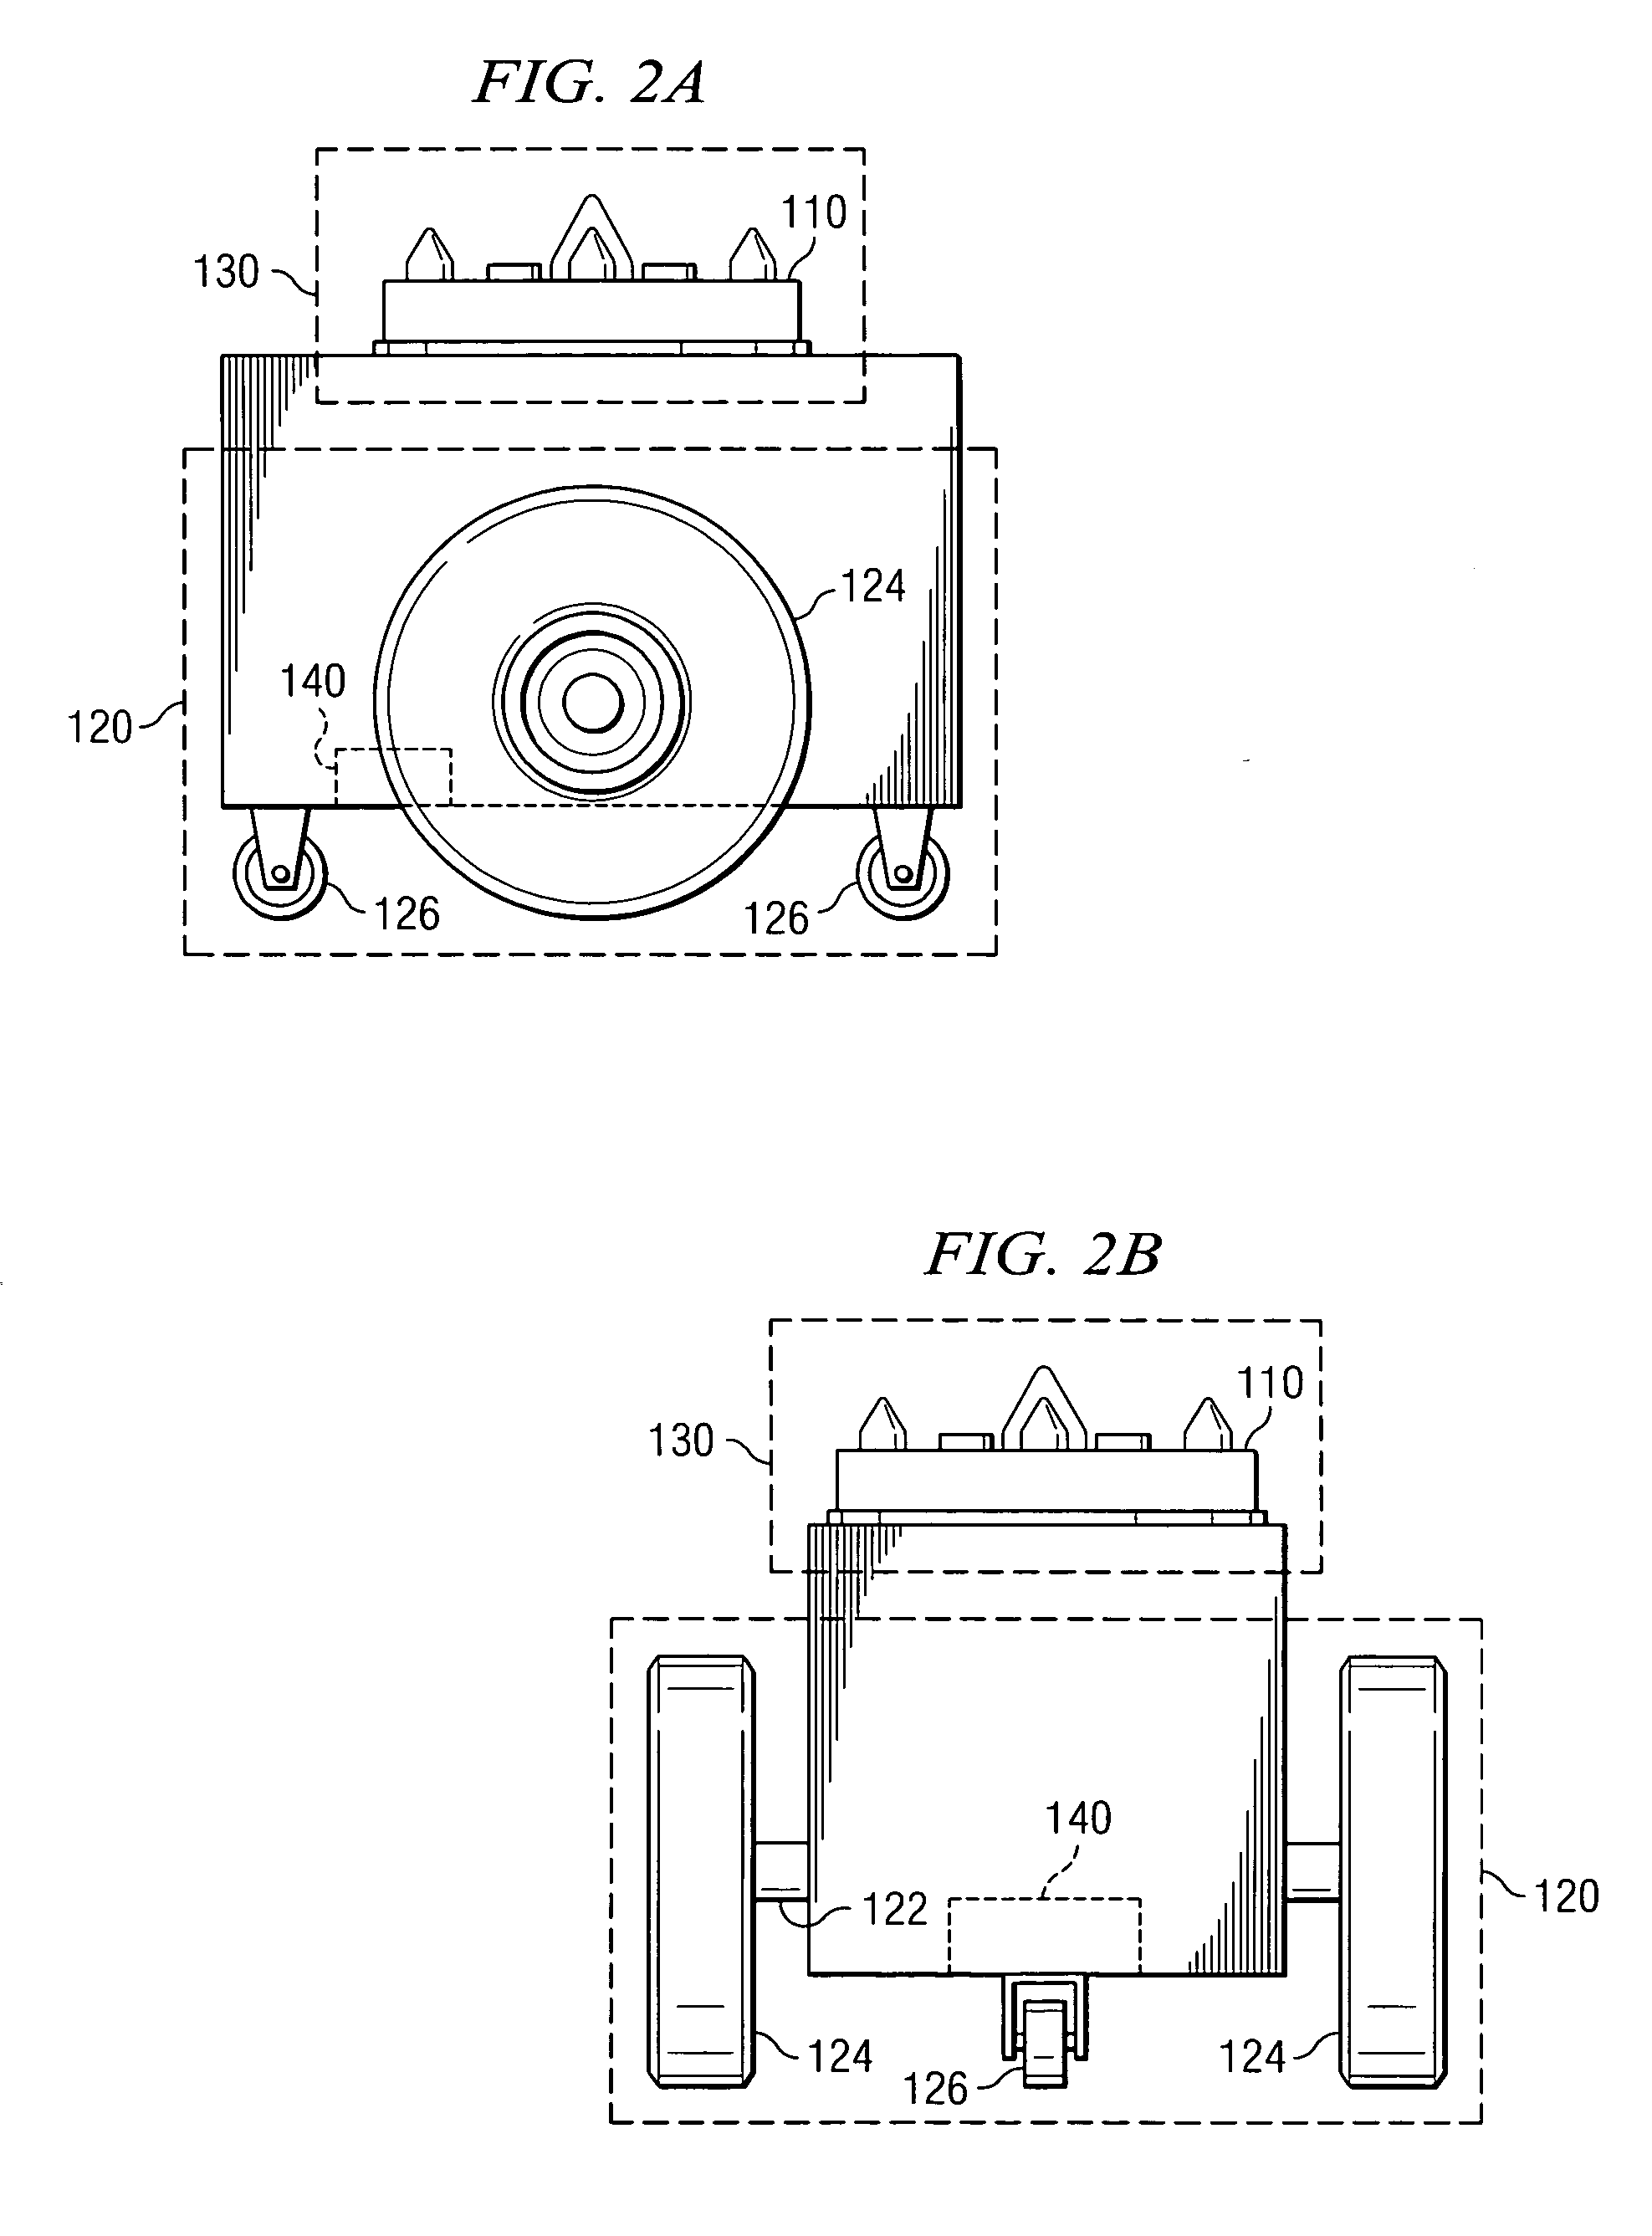 Inventory system with mobile drive unit and inventory holder